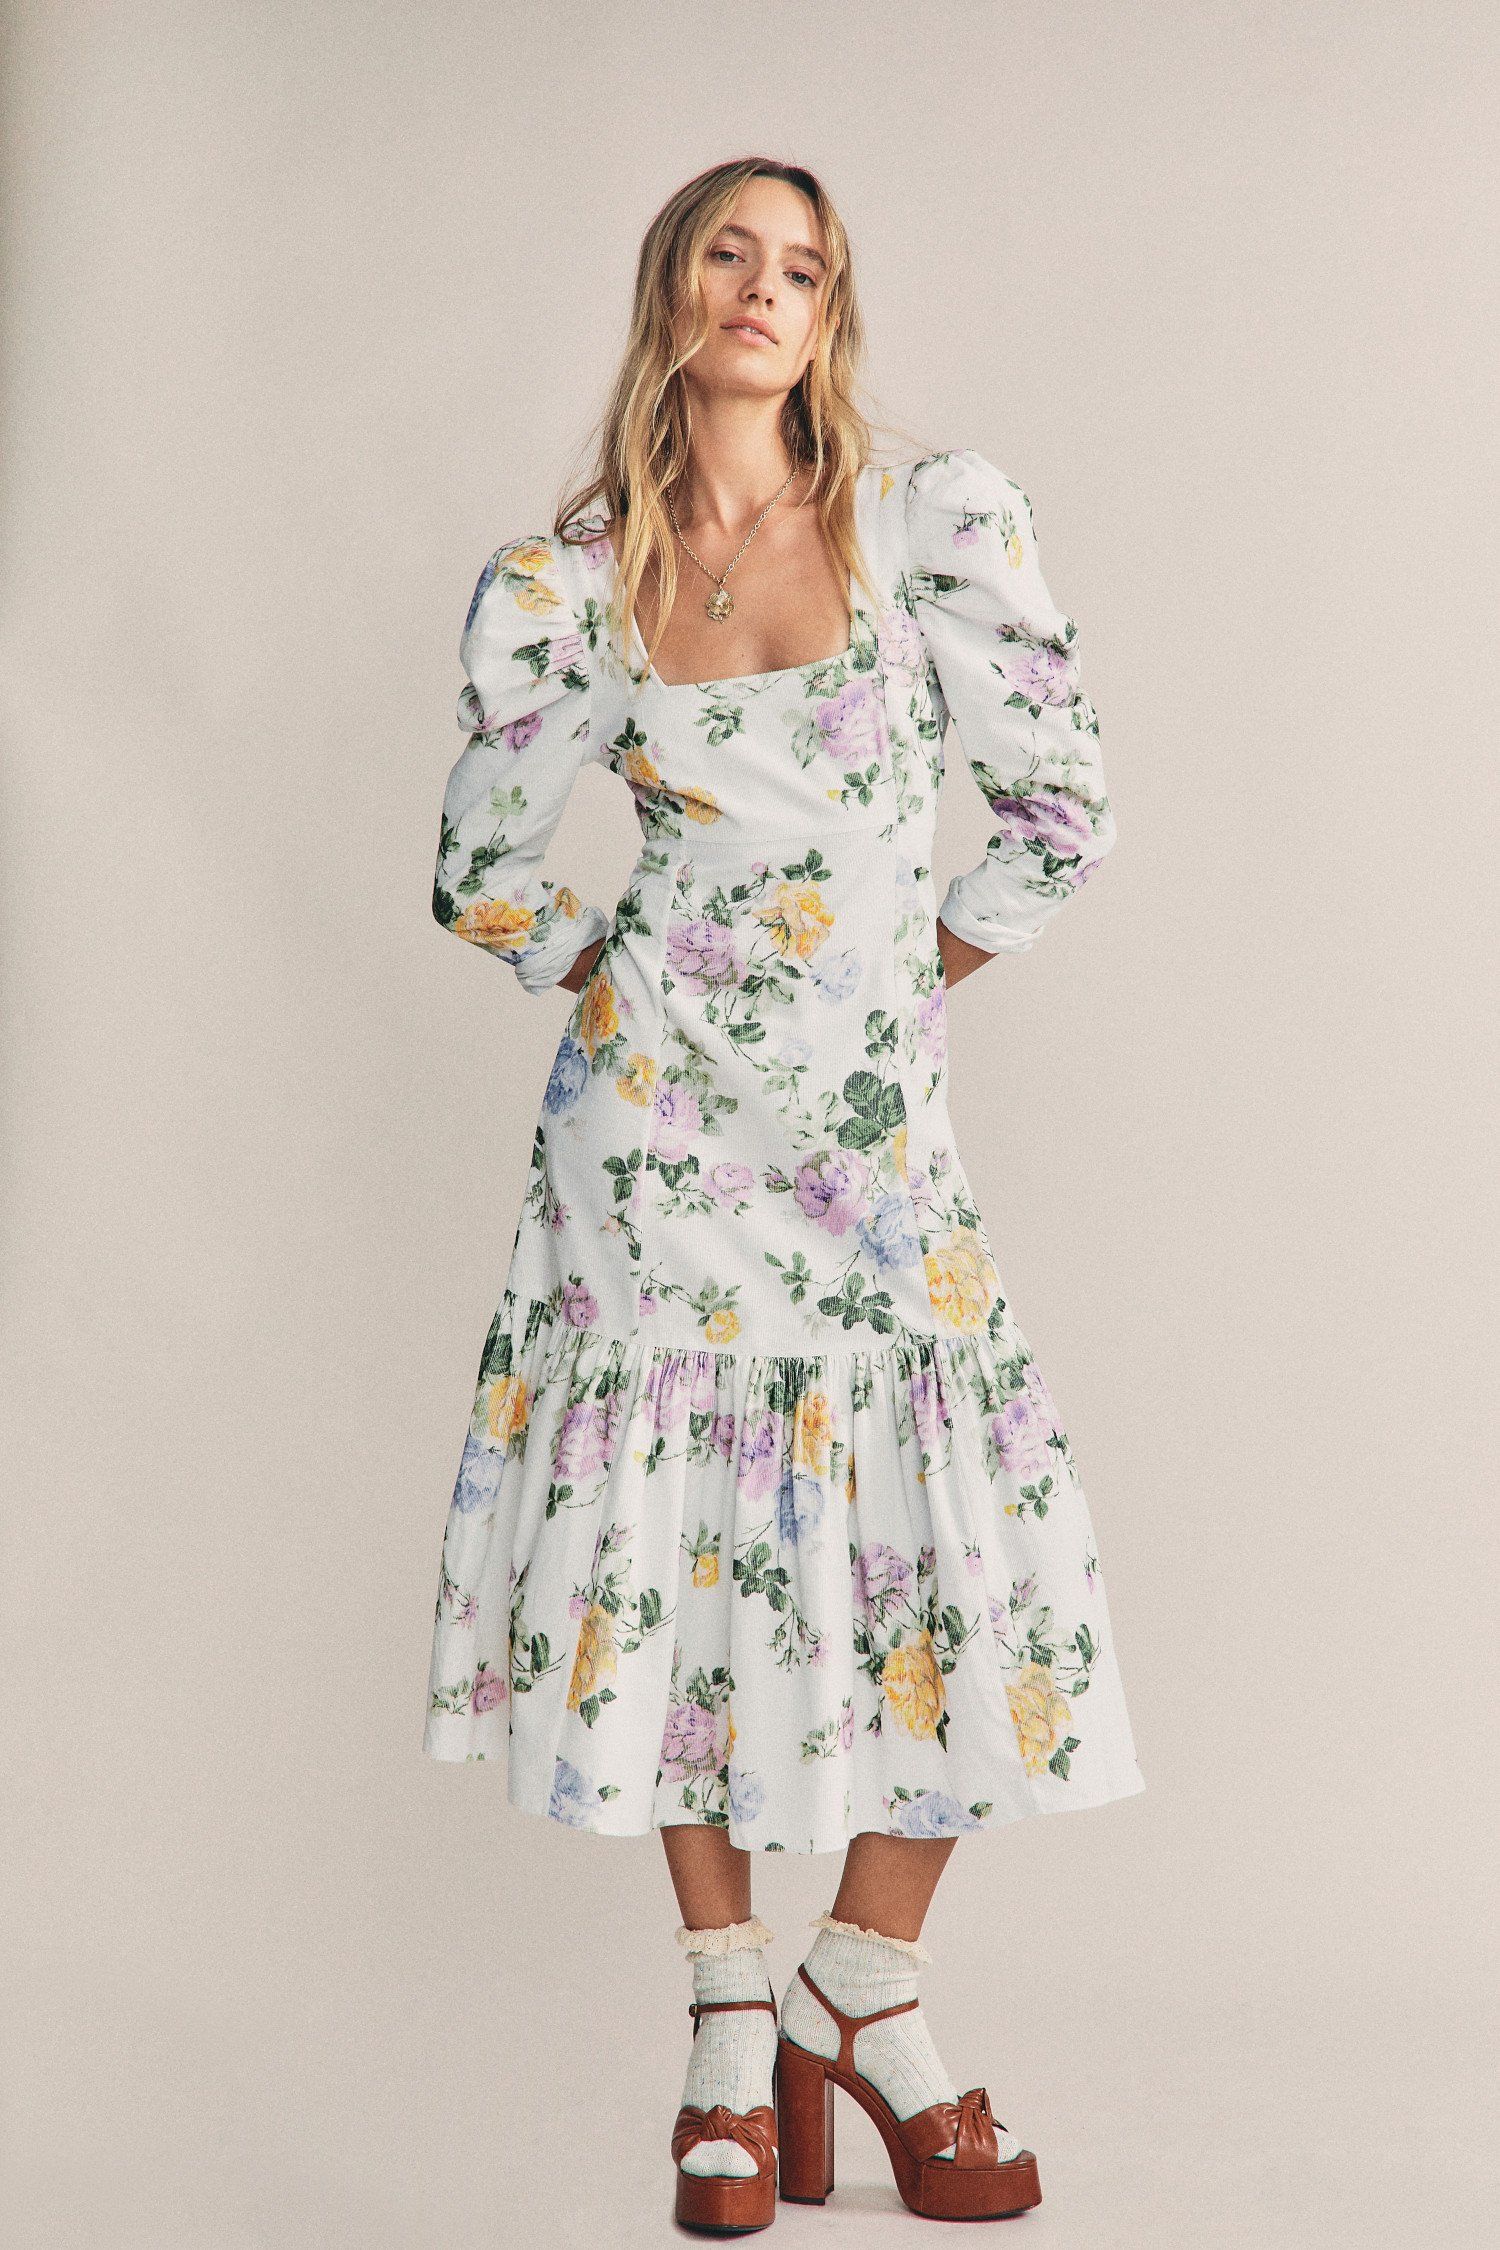 casual spring dresses 2021